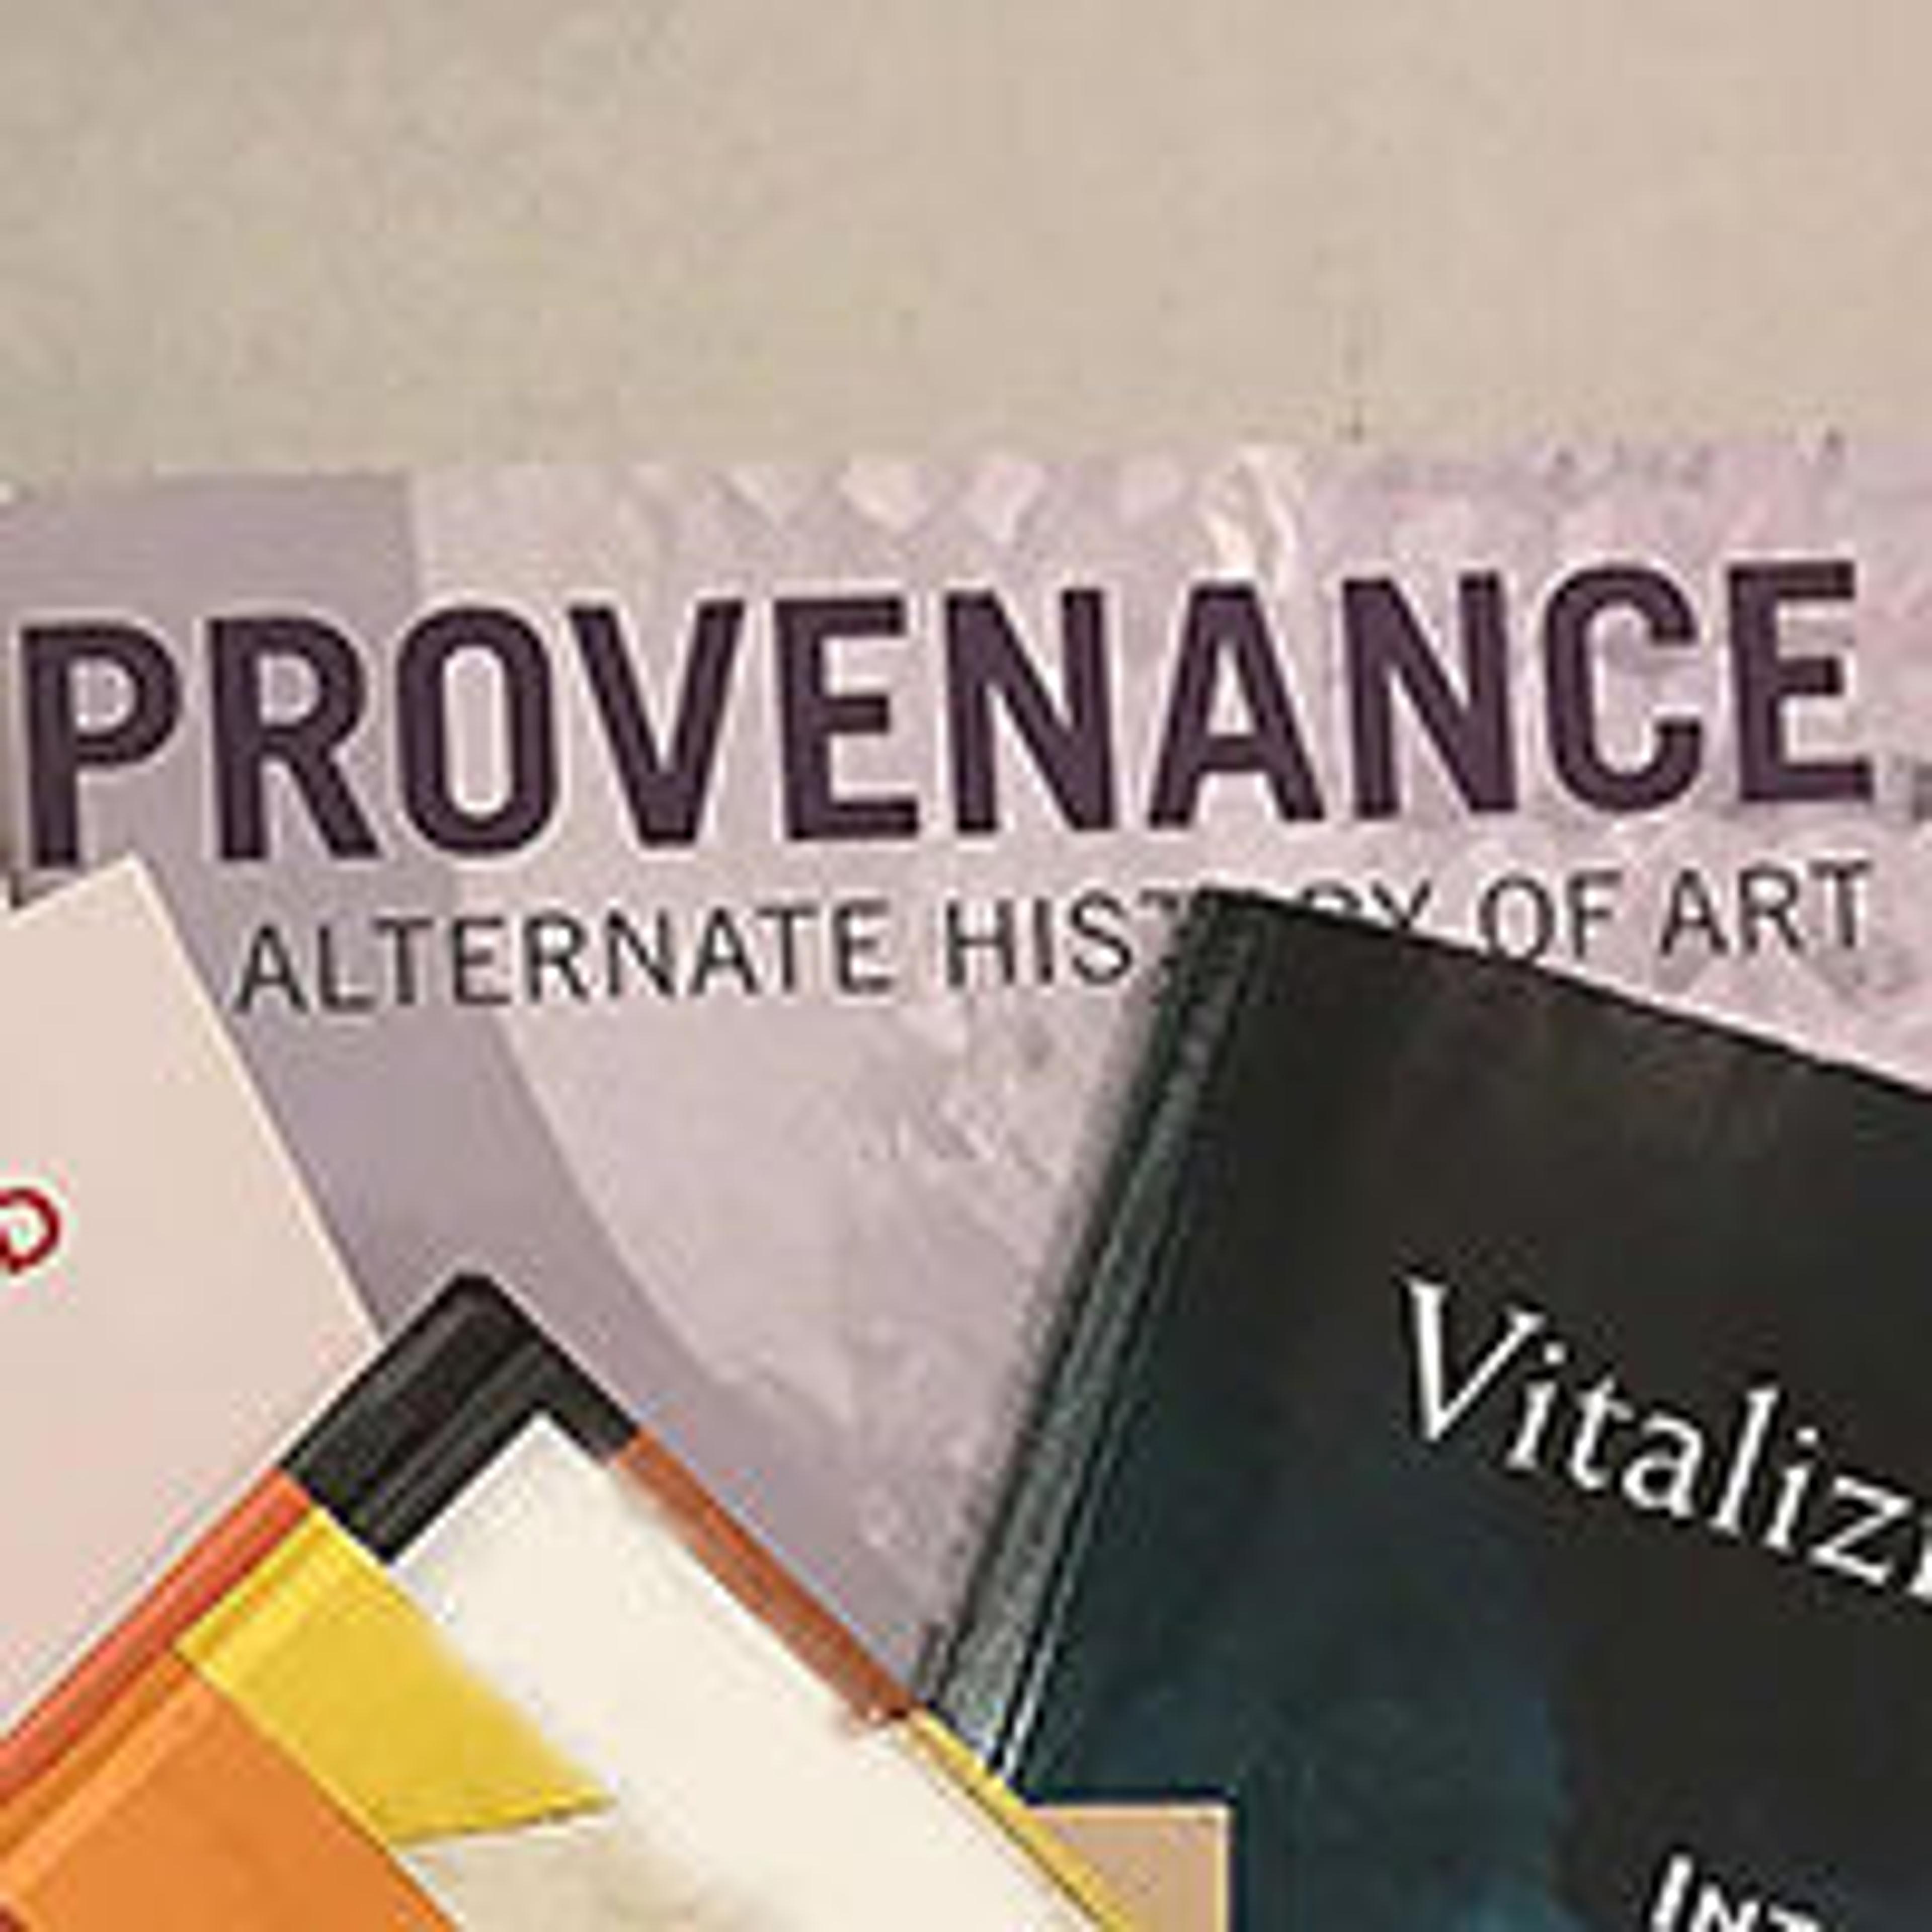 Color photograph of provenance research book covers